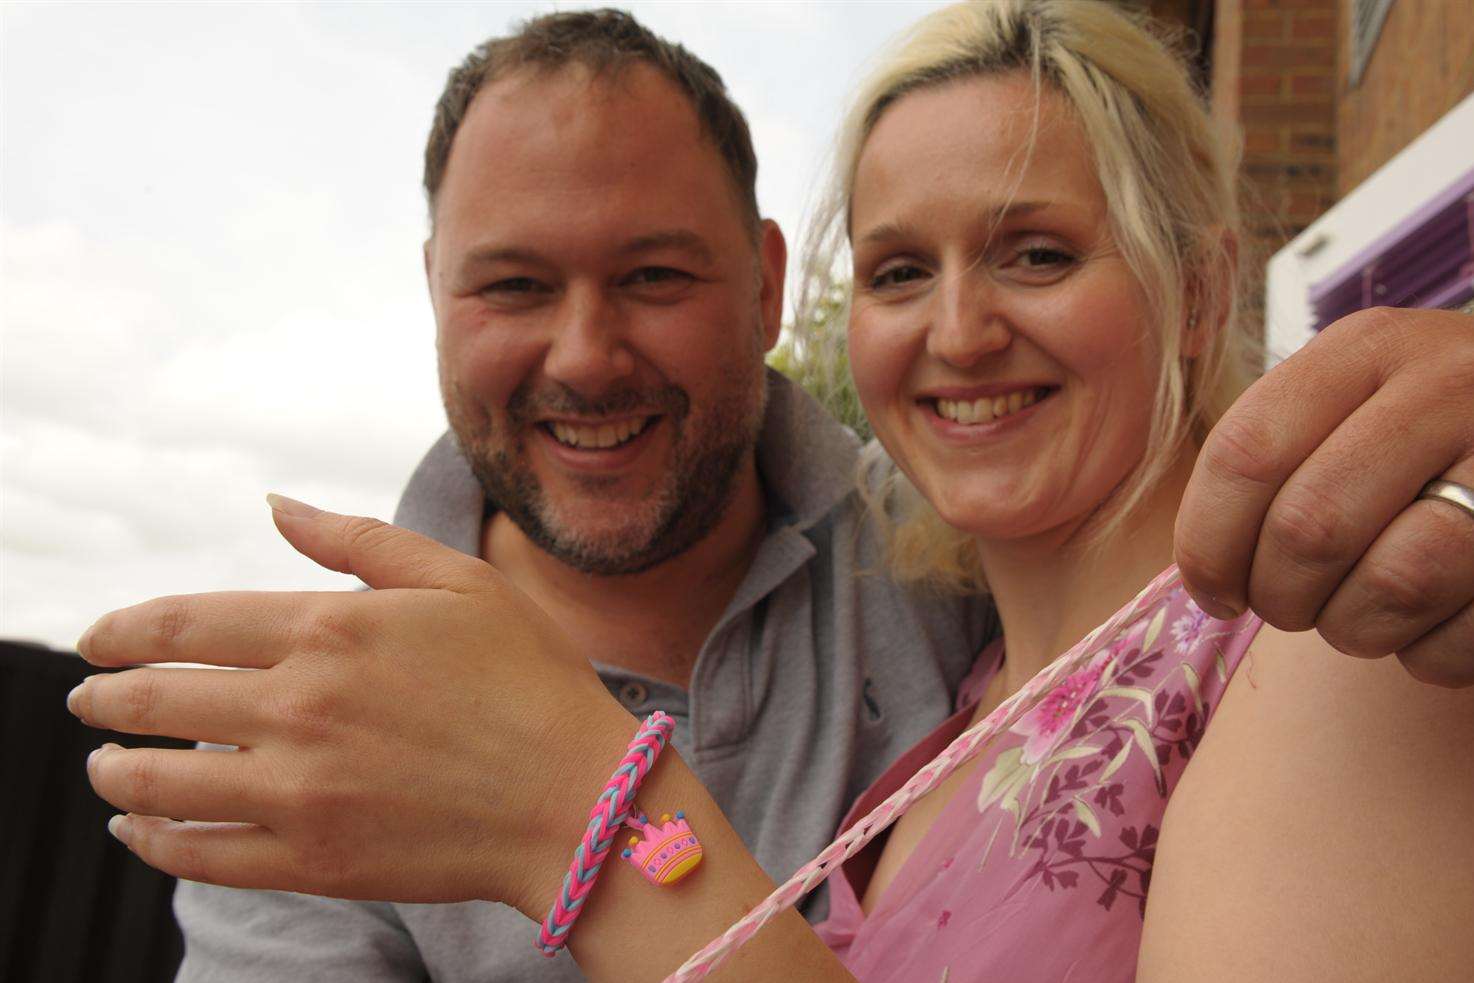 kmfm's Gary and Emma with loom bands.